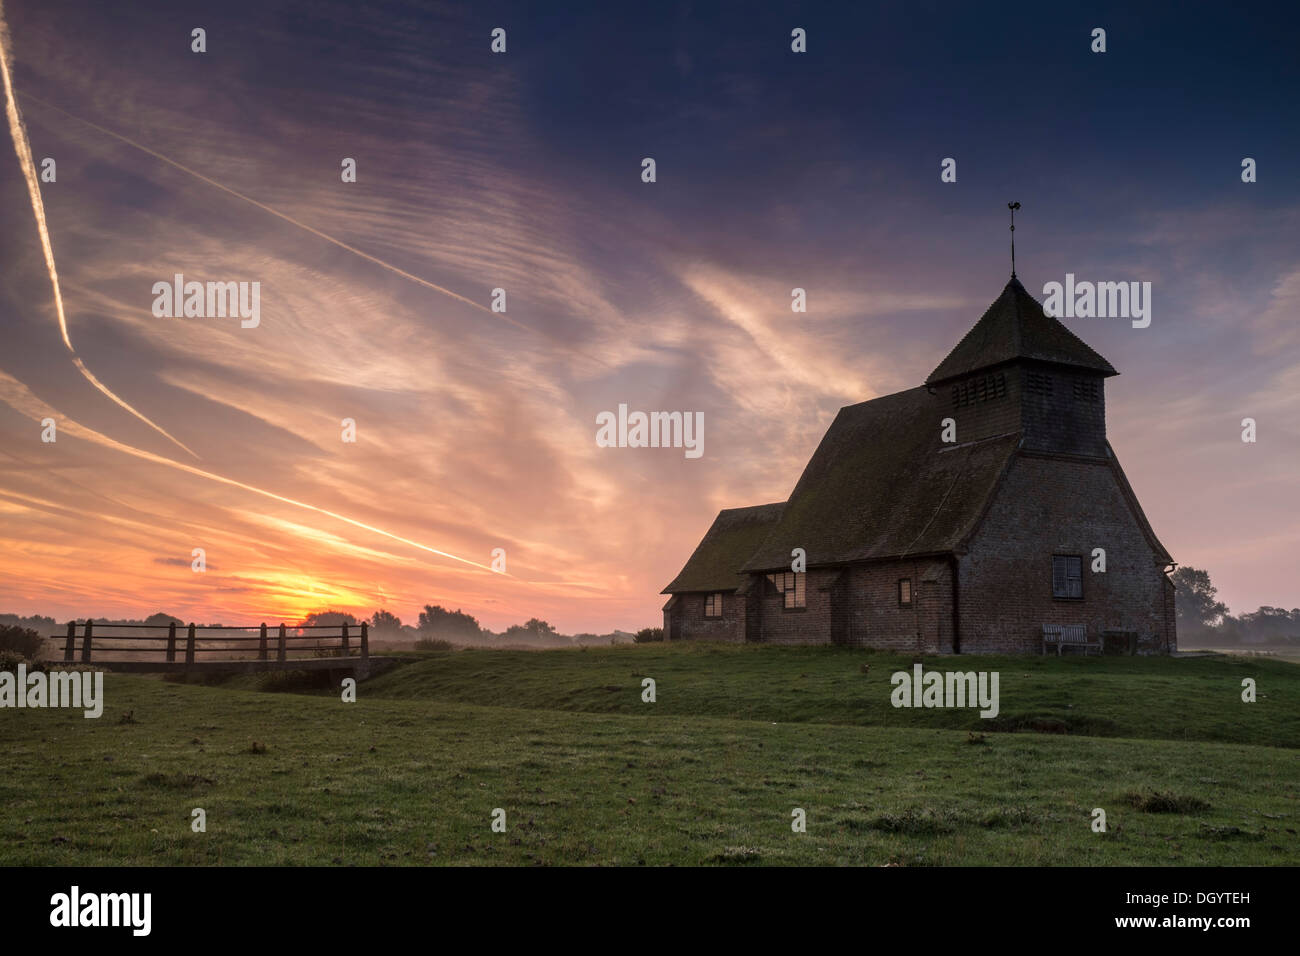 Church of St Thomas a Becket, also often referred to as Fairfield Church, located out on the Romney Marsh in Kent, England Stock Photo